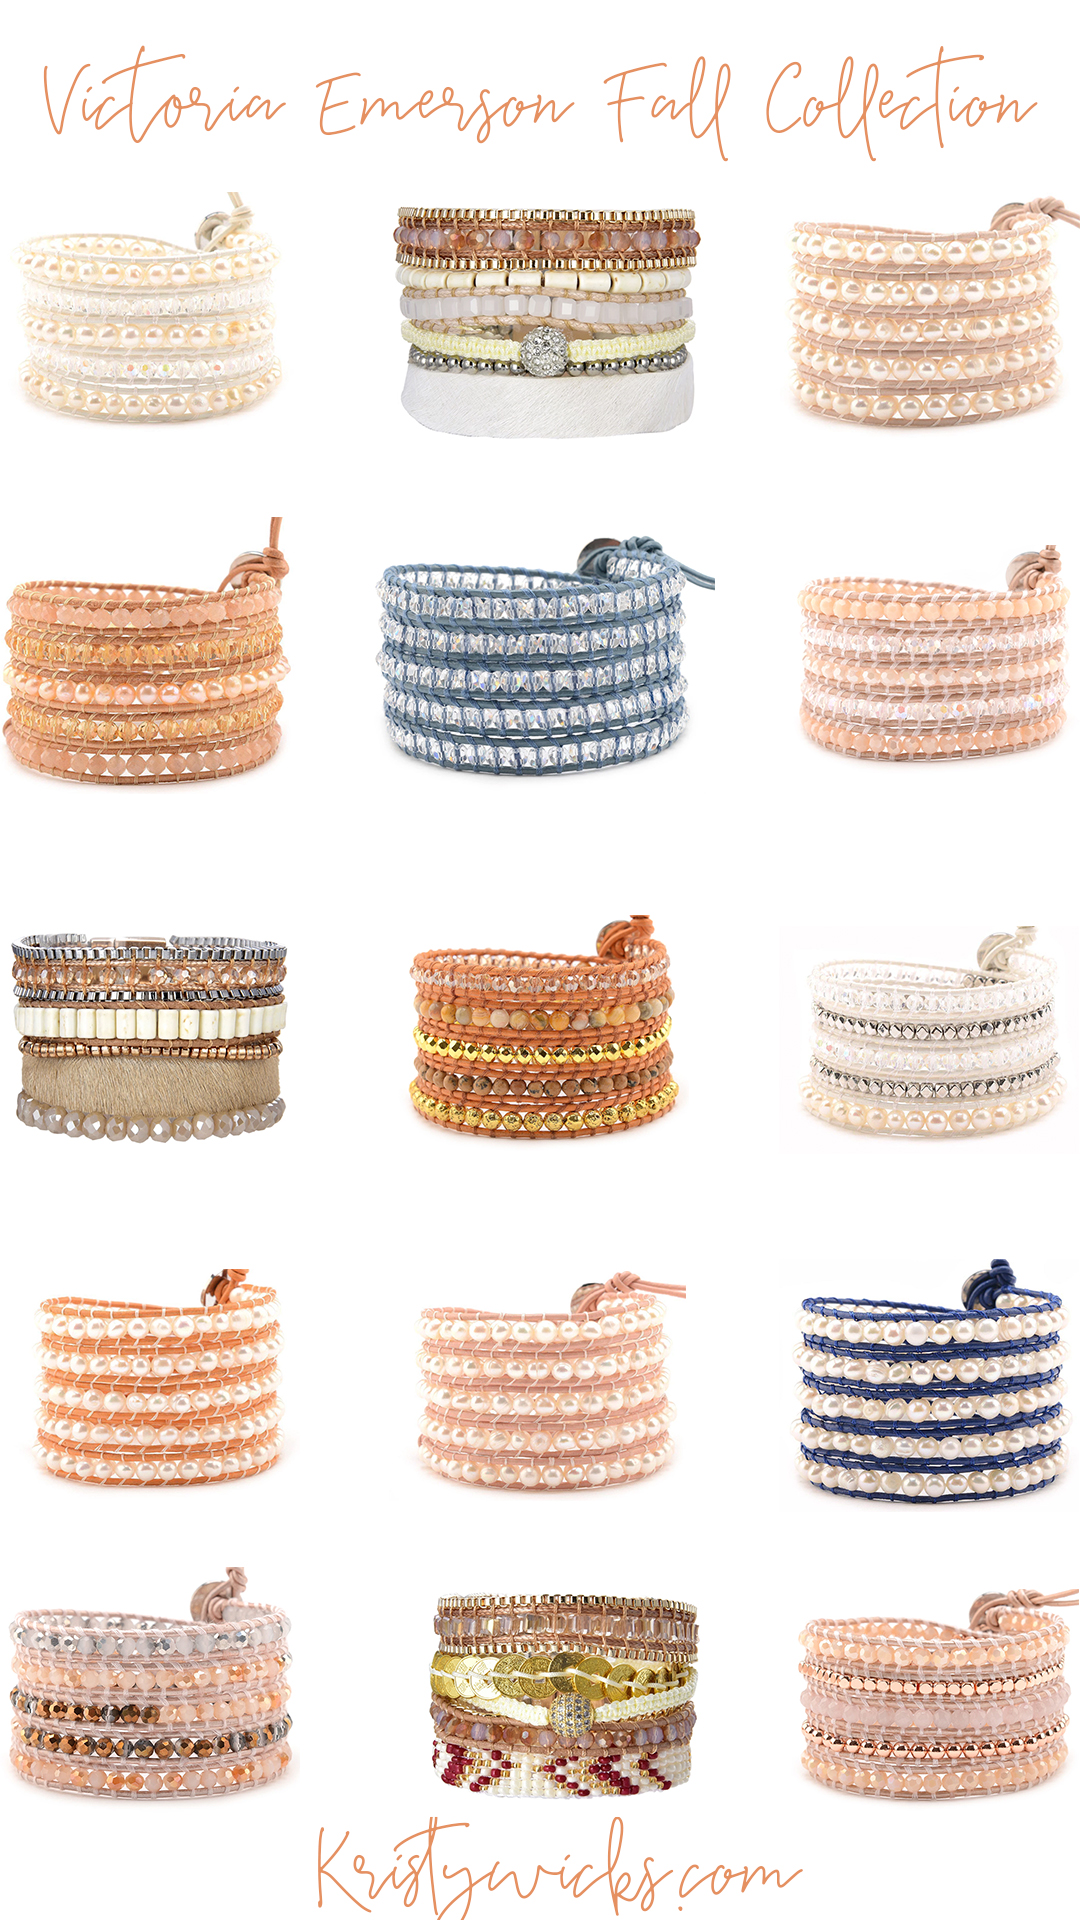 Victoria Emerson Wrap Bracelets on Sale - My favorite jewelry pieces are on 30% off right now.. their newest Fall collection is gorgeous! 